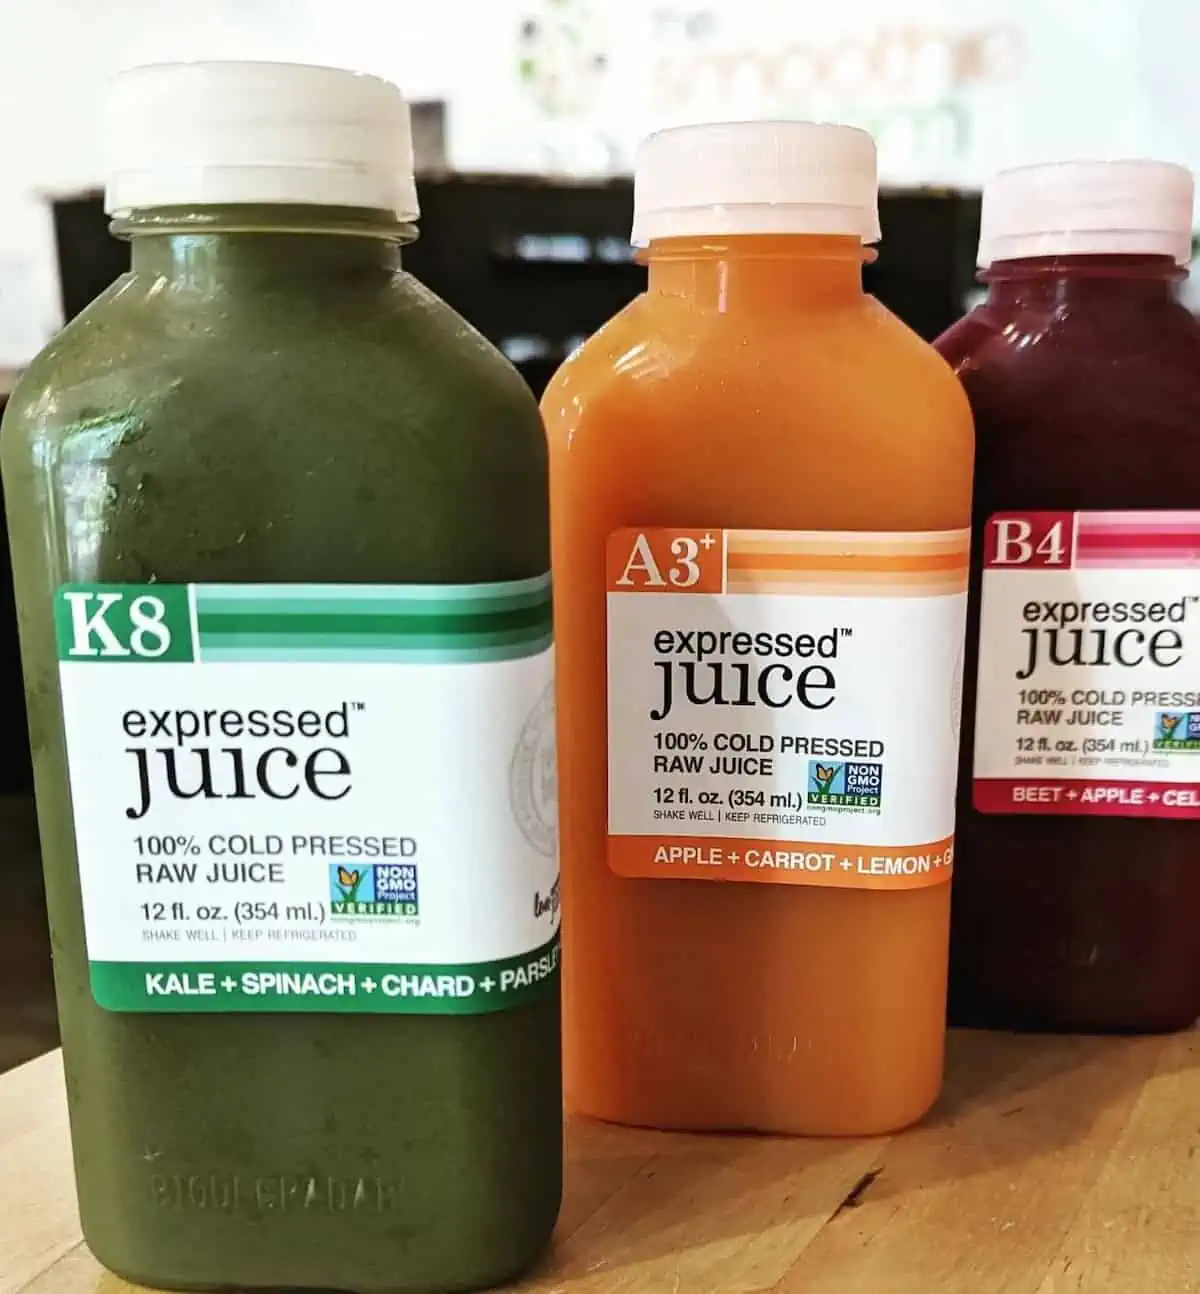 Detox juices from The Smoothie Room.